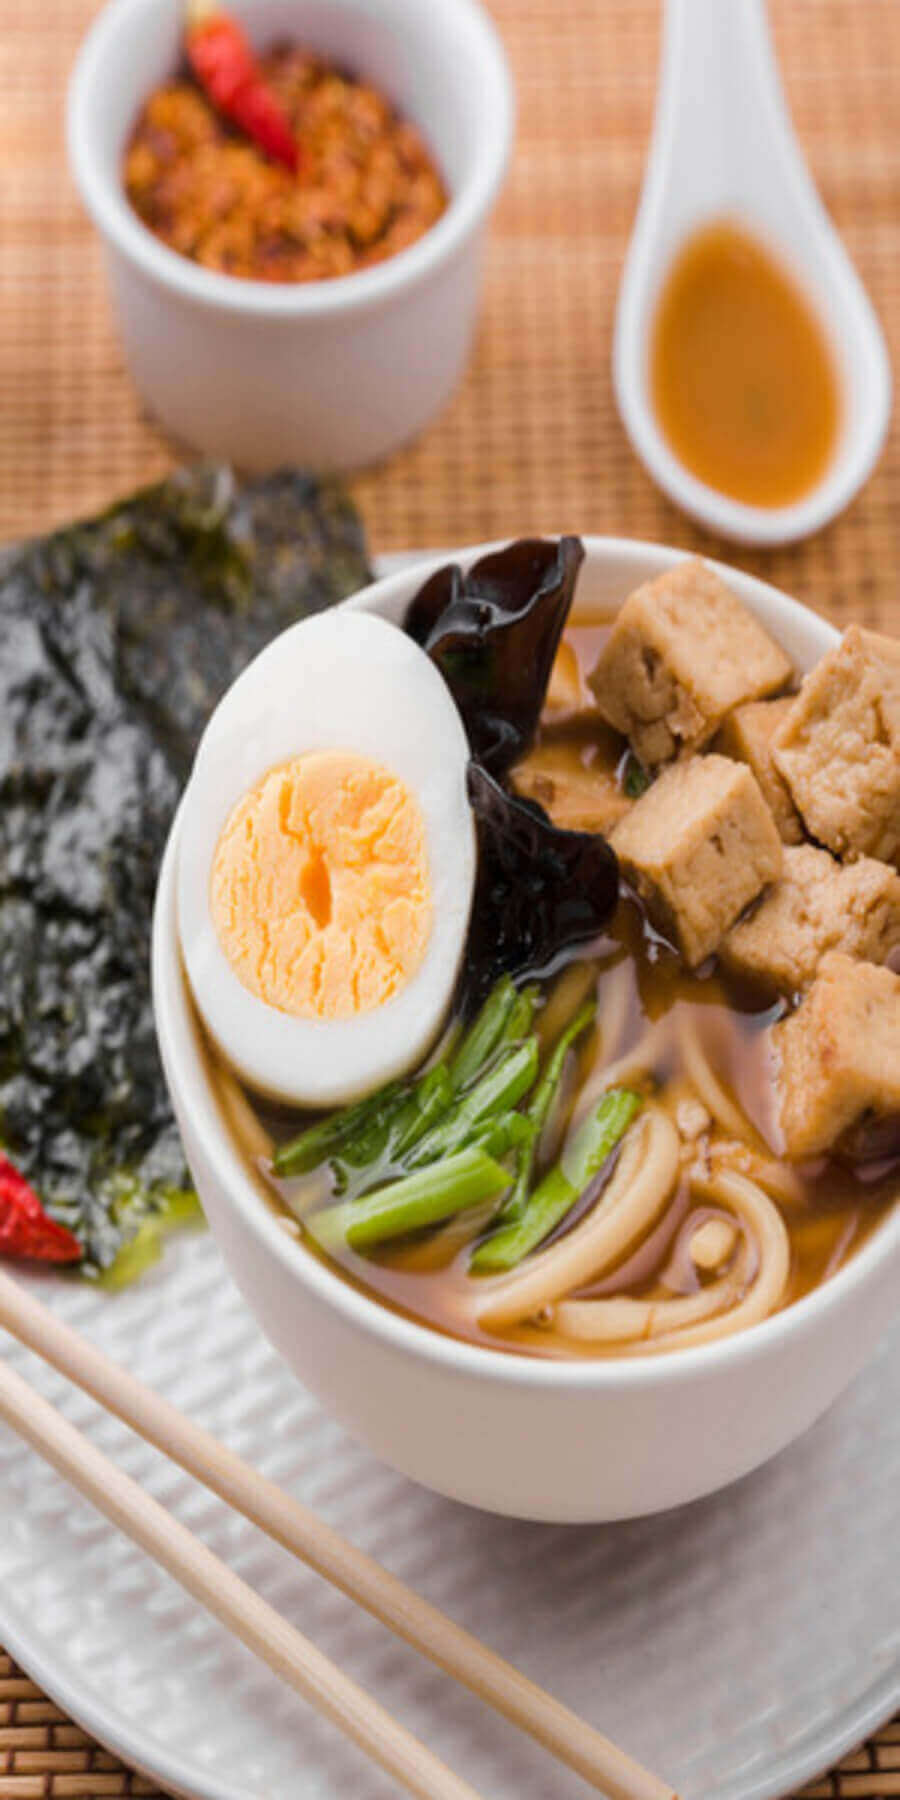 Bowl of ramen with egg